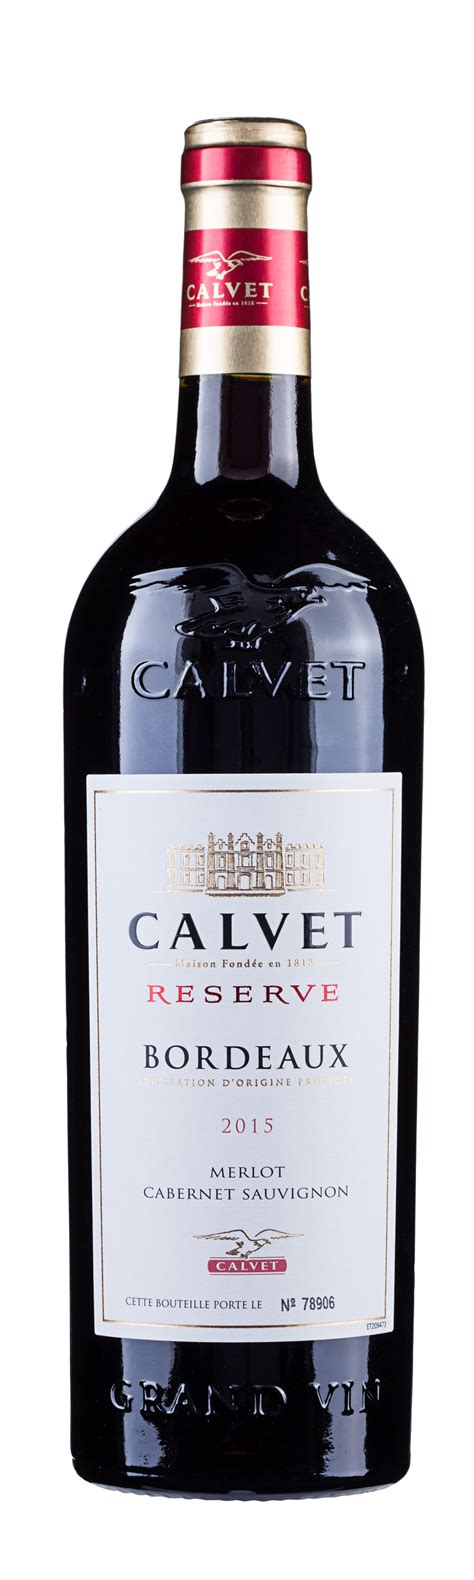 Calvet - Calvet Prestige AOP Bordeaux Red (£8.25, Sainsbury’s) Taste: Soft and fruity with notes of blackcurrant and cherry, with a hint of spice. Eat: Red meats, pizza and pasta, cheese. This Prestige Cuvée is a specially selected, carefully matured blend of Merlot and Cabernet Sauvignon – Bordeaux’s calling card. Not for nothing is the wine ...